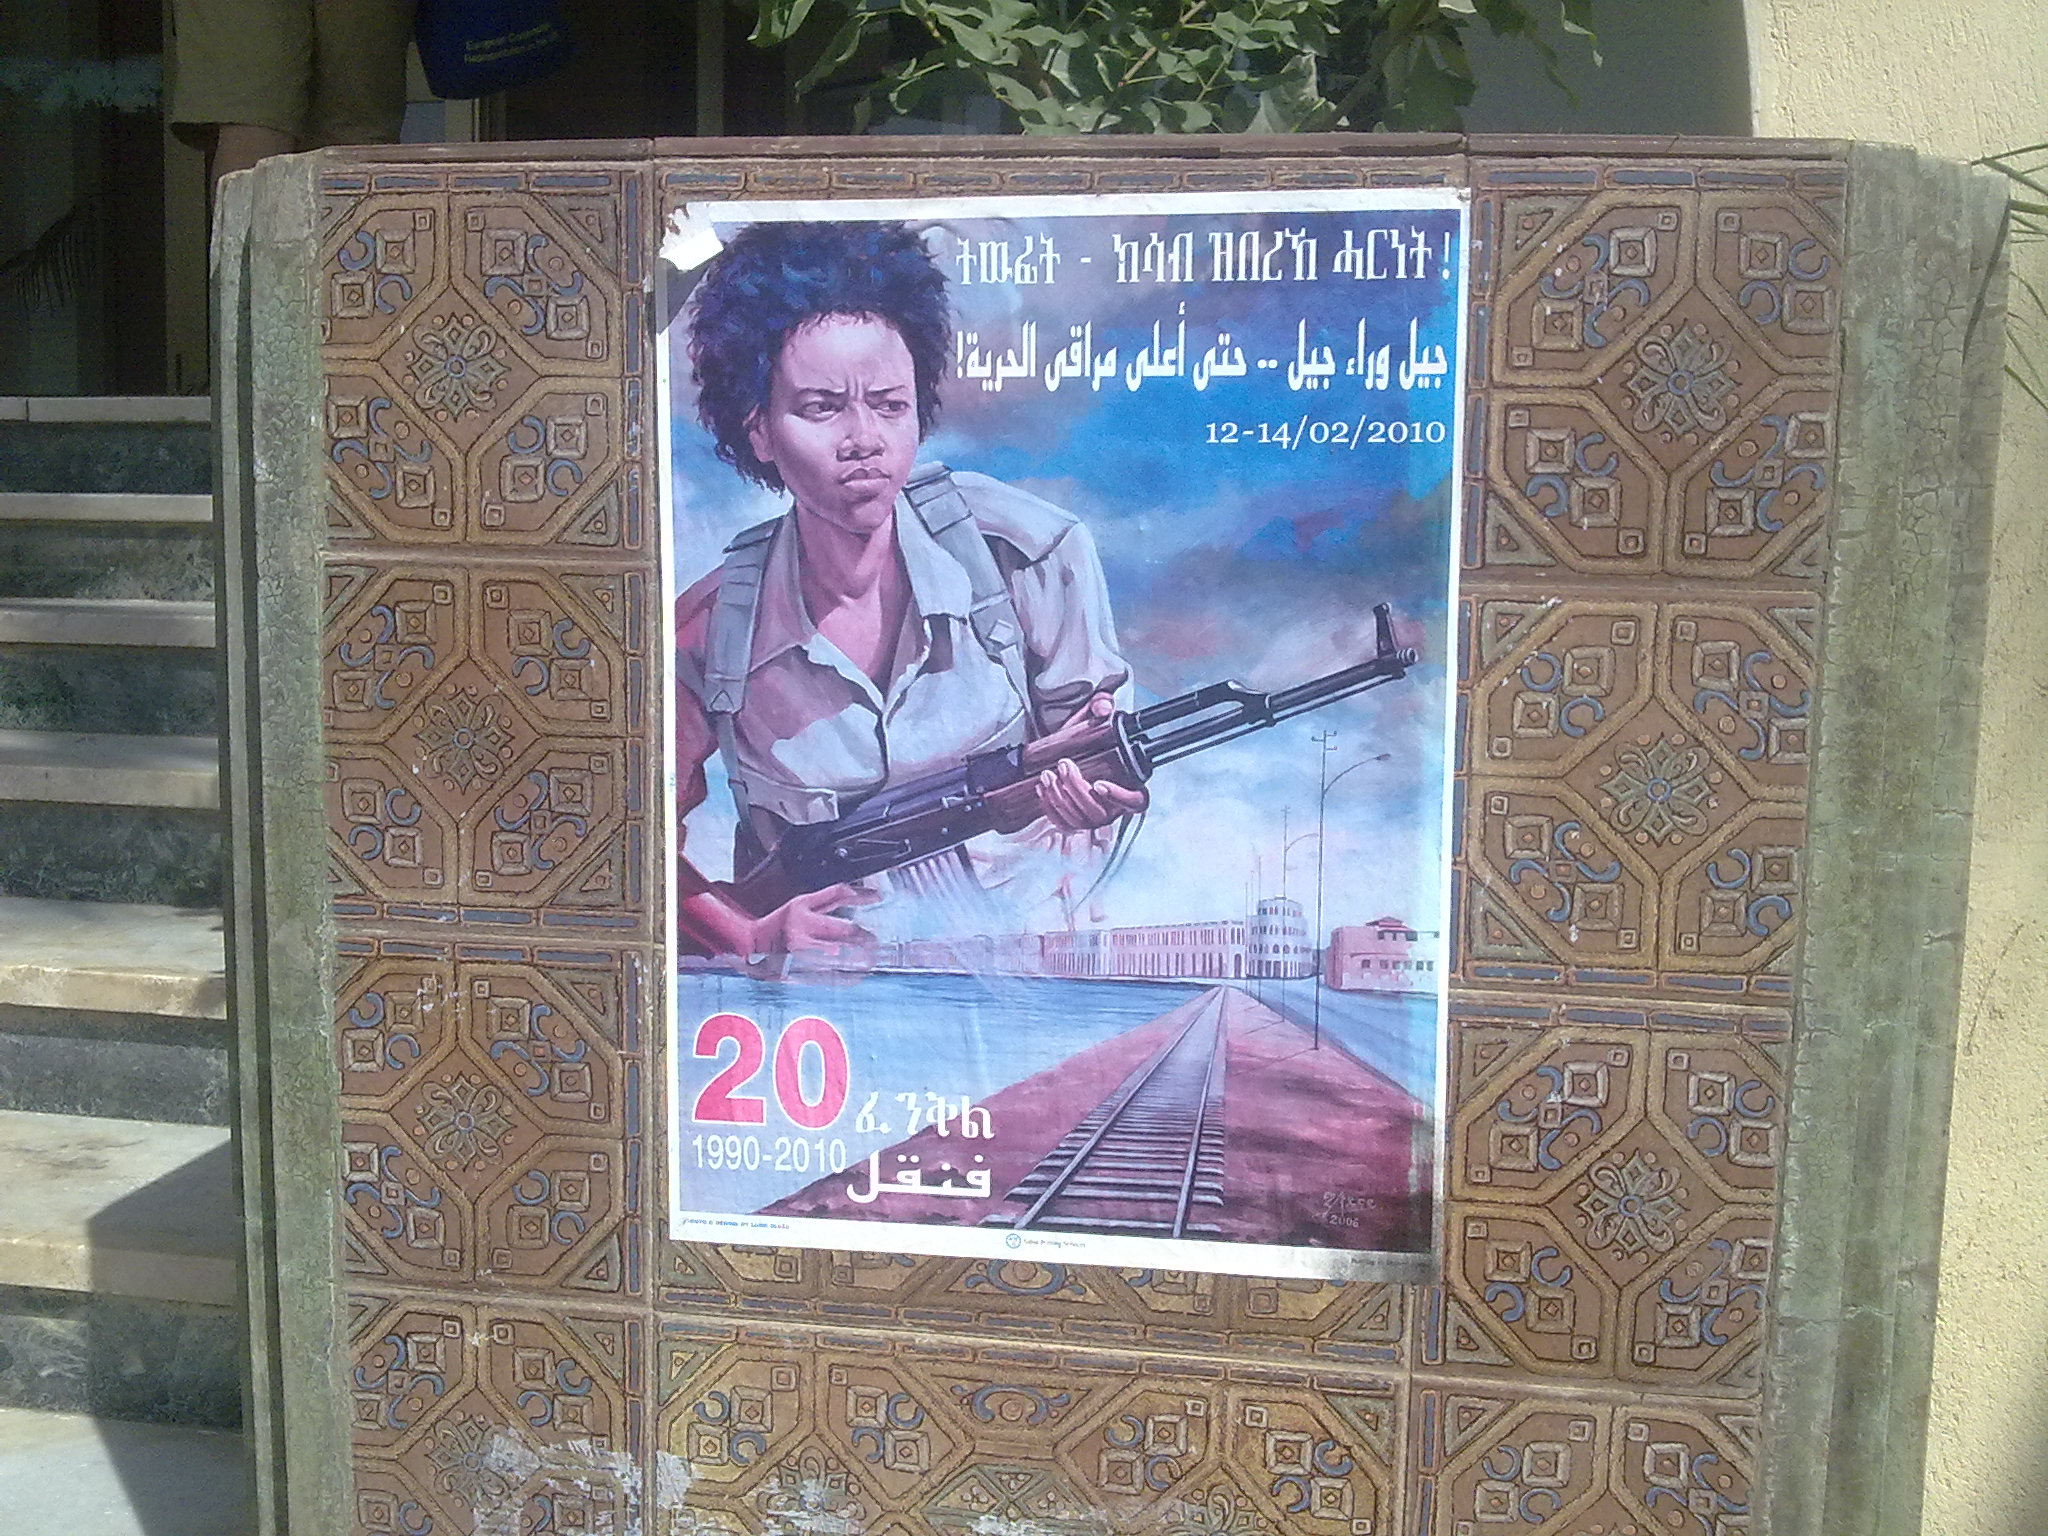 Armed struggle and post-independence conflicts shape contemporary Eritrea. Photo by Lia via Flickr (CC-BY-ND-2.0)